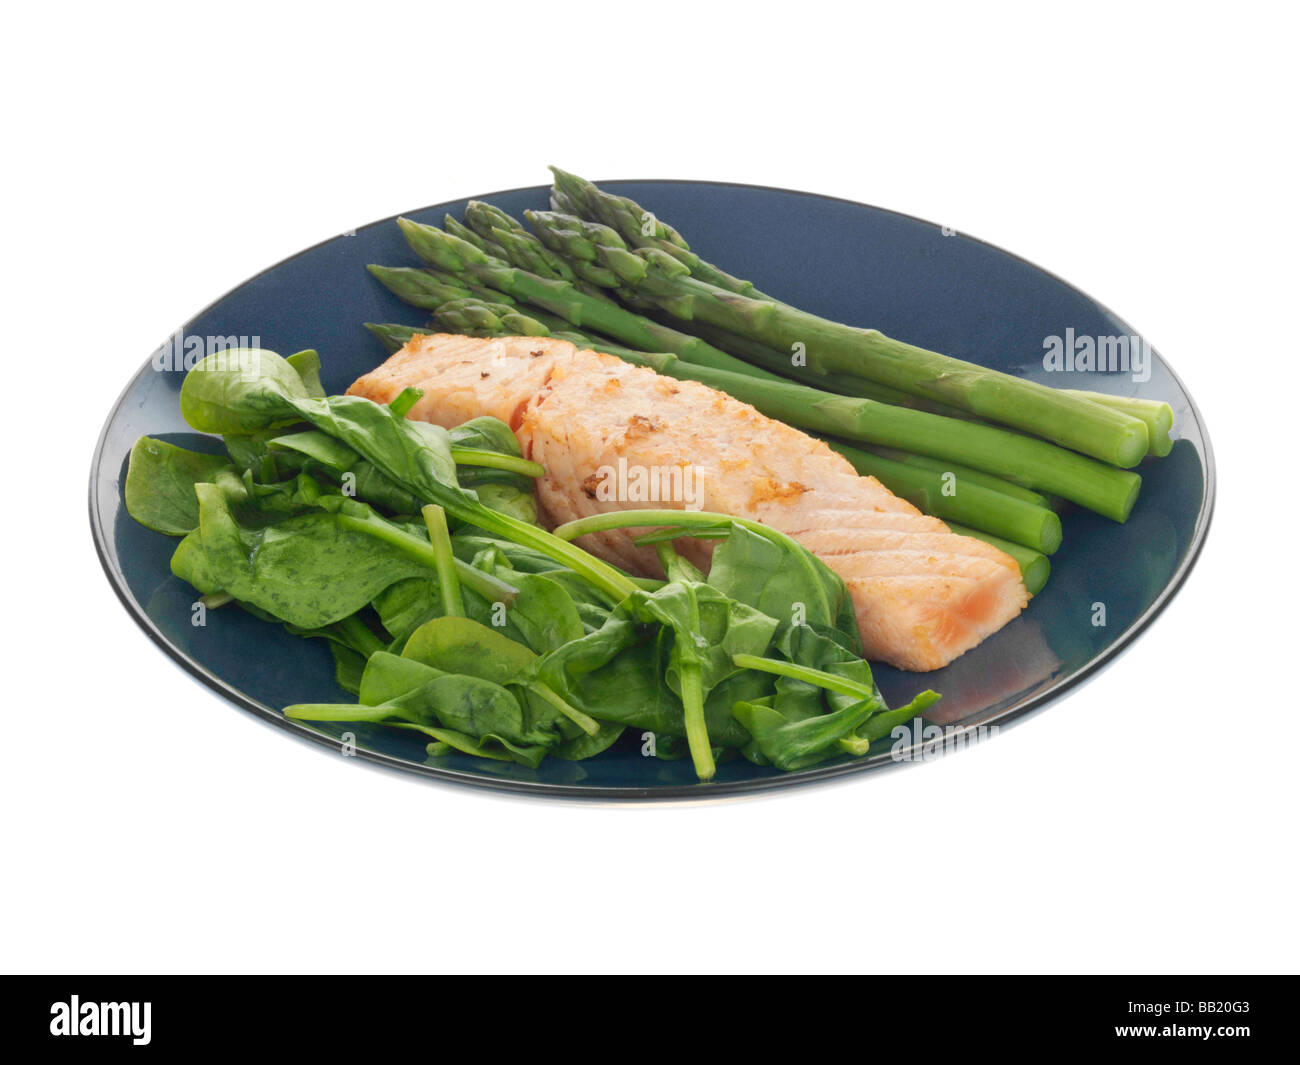 Baked Salmon Fillet with Vegetables Stock Photo